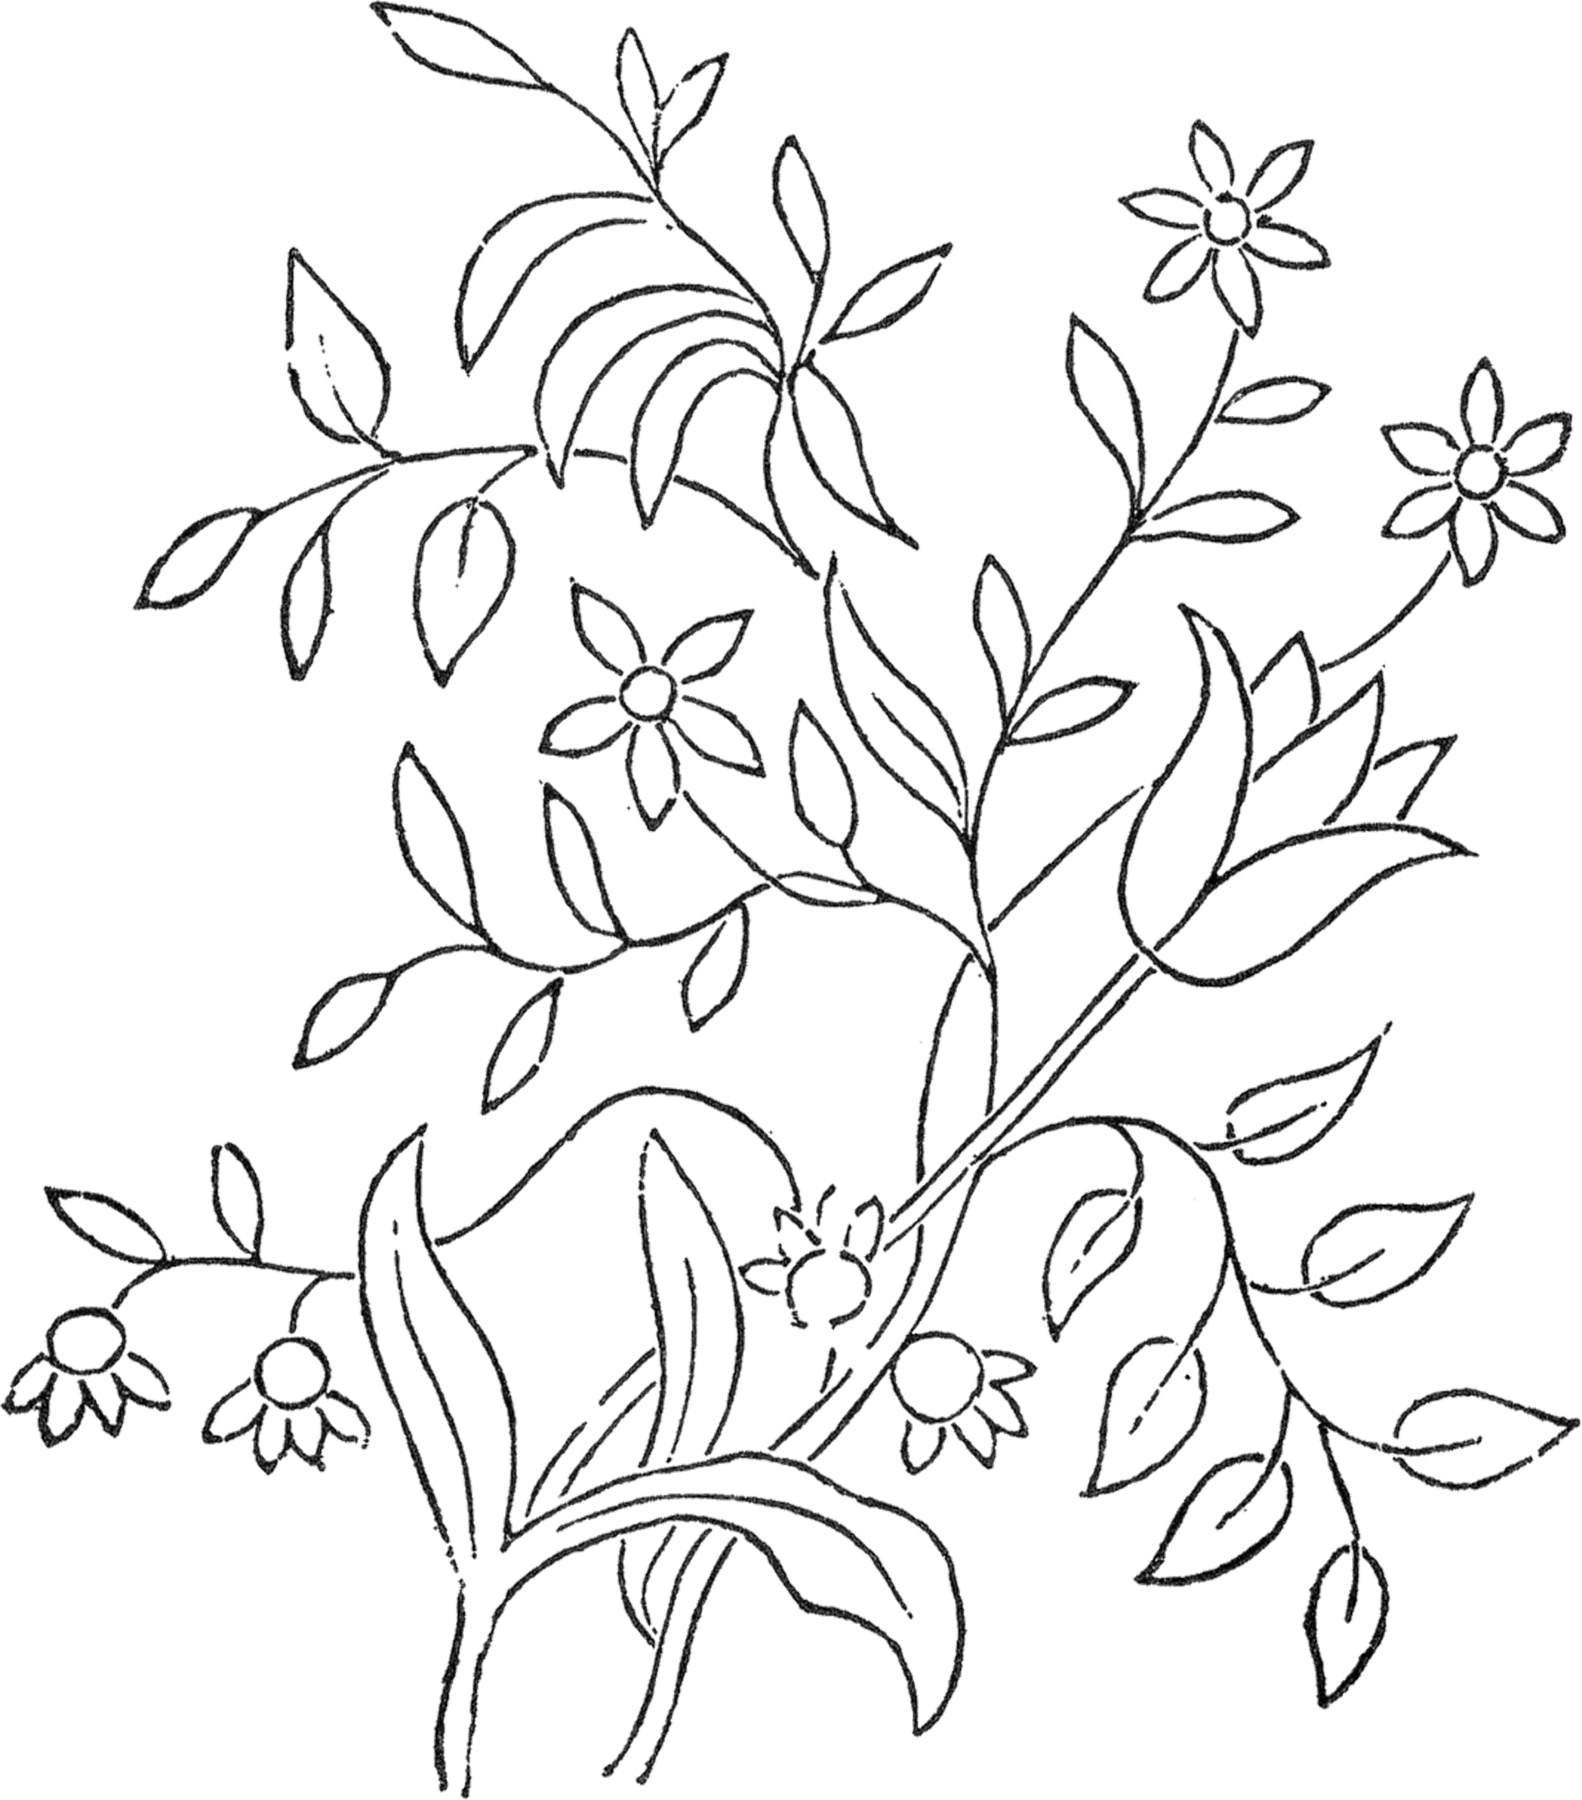 15100 Embroidery Designs Flowers Drawing Illustrations RoyaltyFree  Vector Graphics  Clip Art  iStock